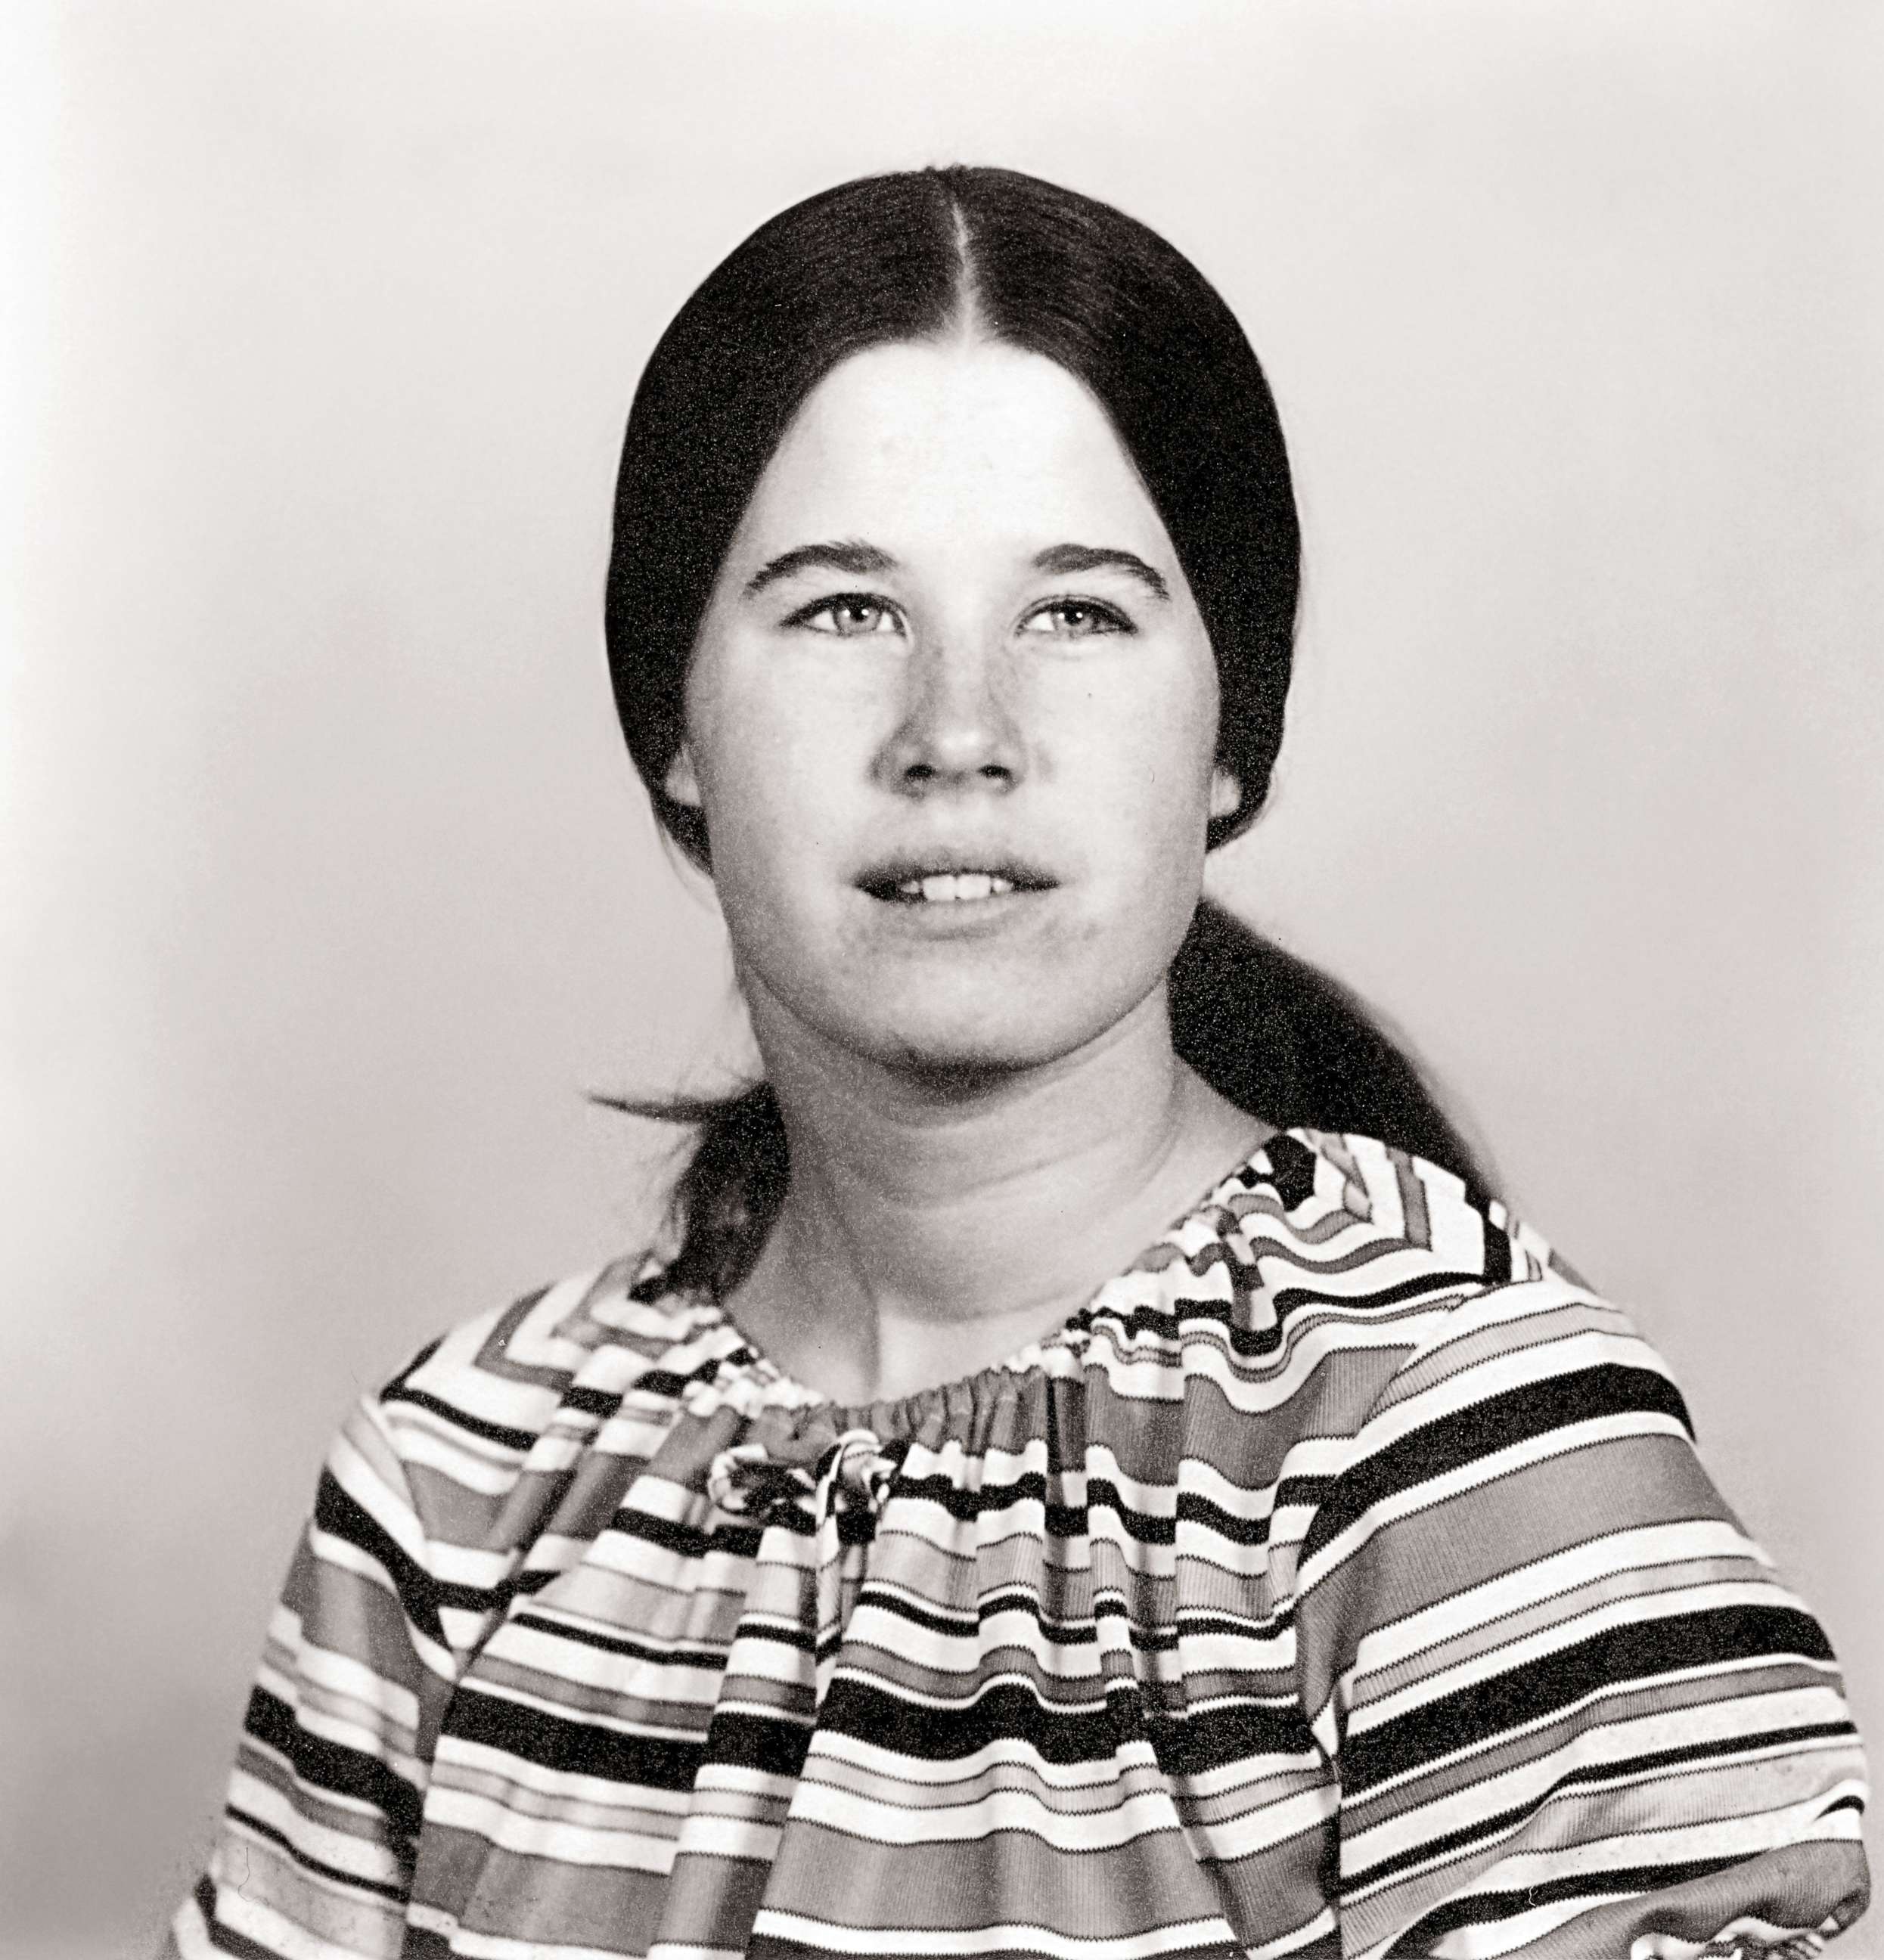 PHOTO: An undated photo of Dianne Lake, now 64, whom lived with Charles Manson and became the youngest member of his cult.